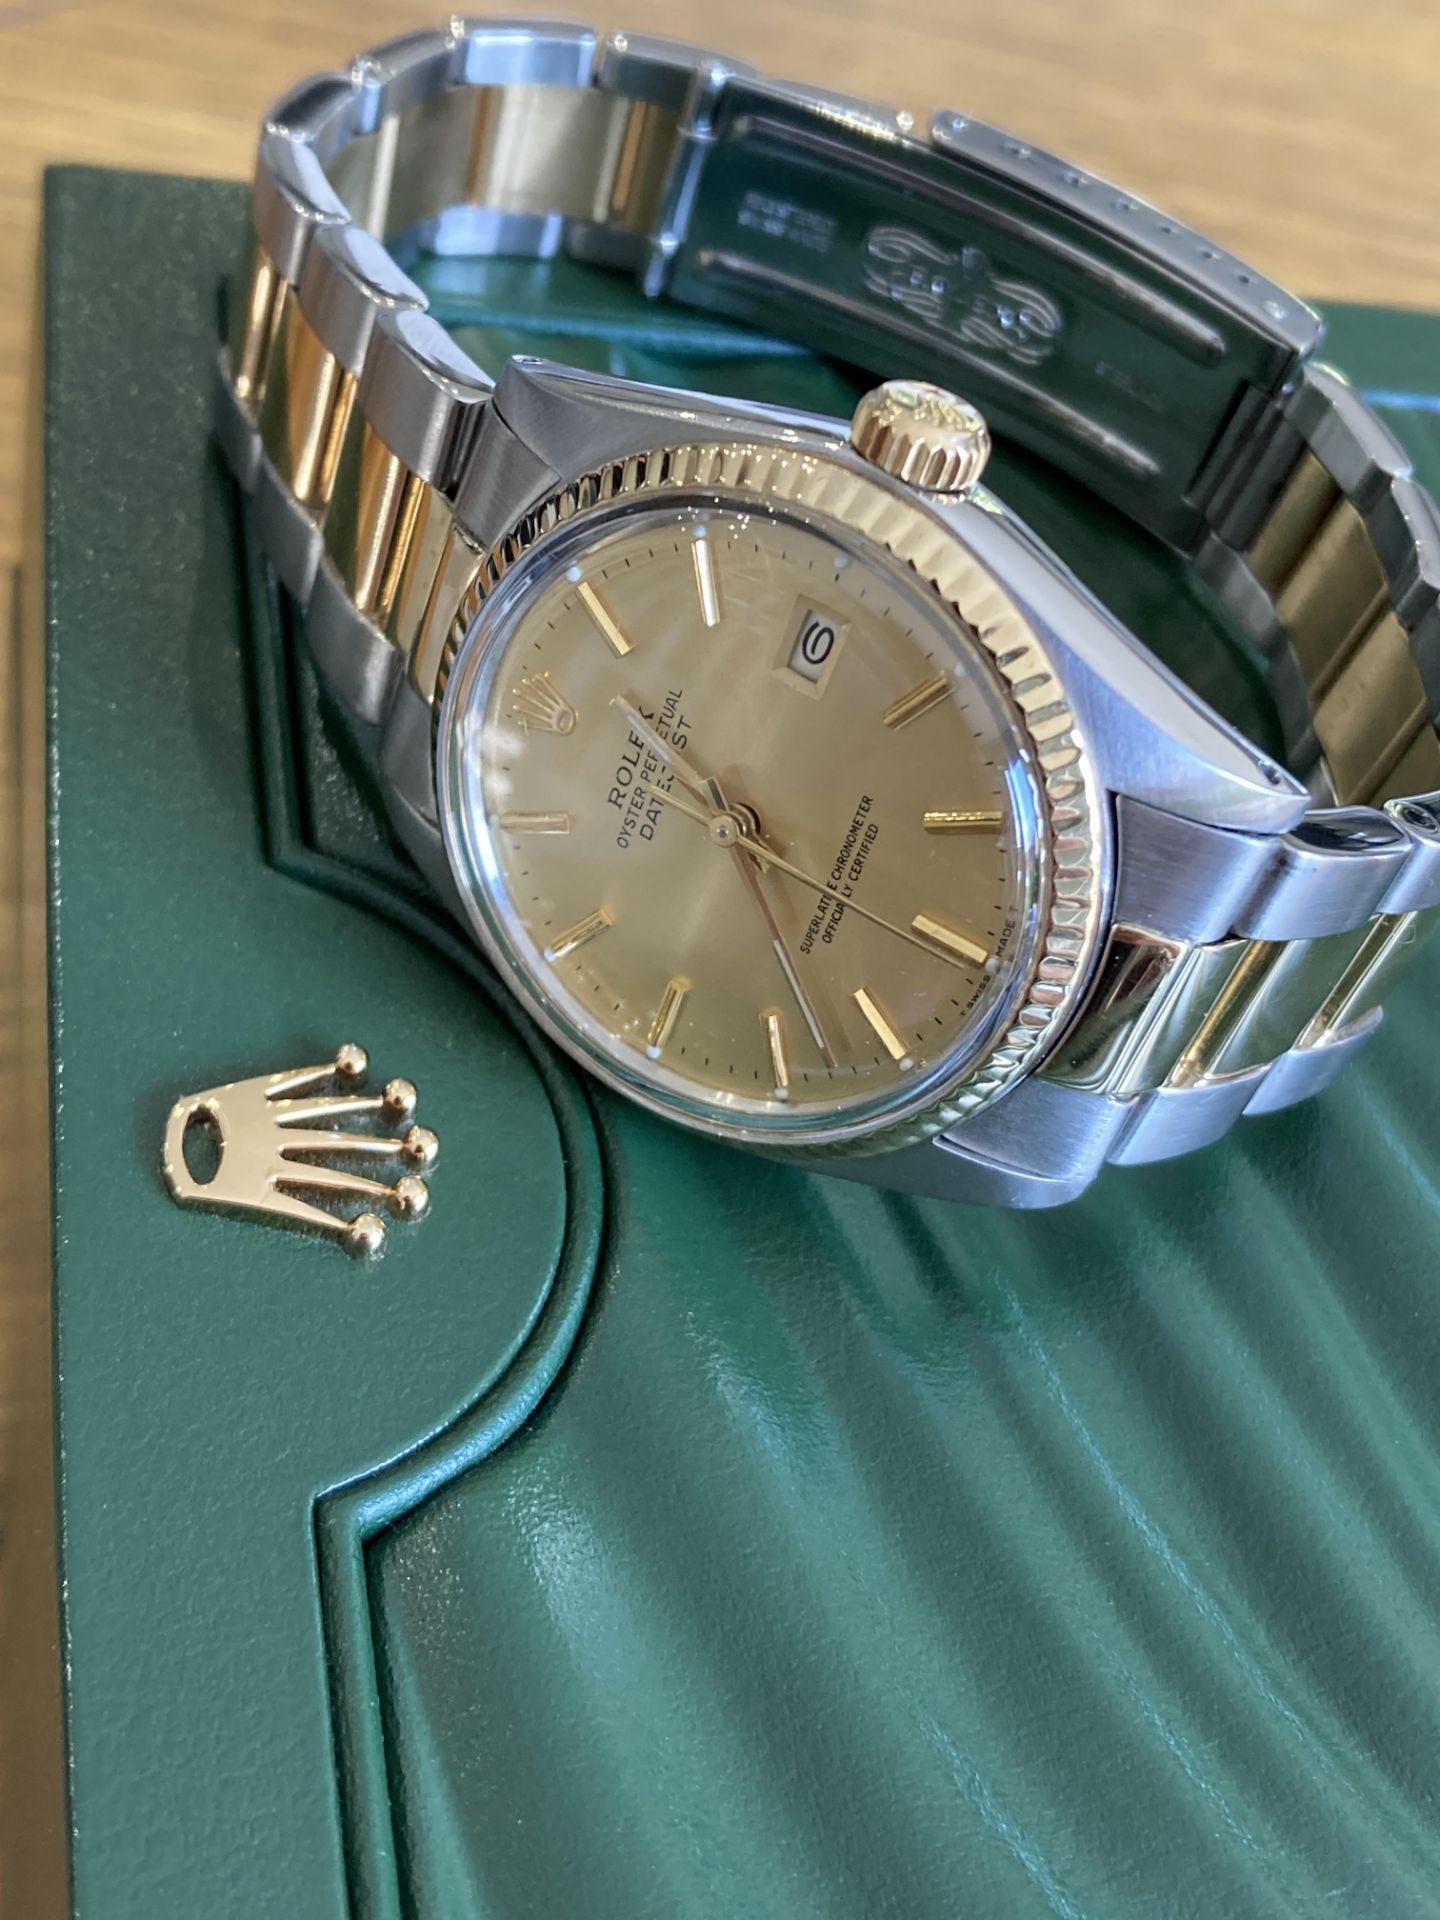 ROLEX DATEJUST 36MM, BIMETAL STAINLESS STEEL & 18CT YELLOW GOLD, CHAMPAGNE DIAL - BOX NOT INCLUDED - Image 7 of 11